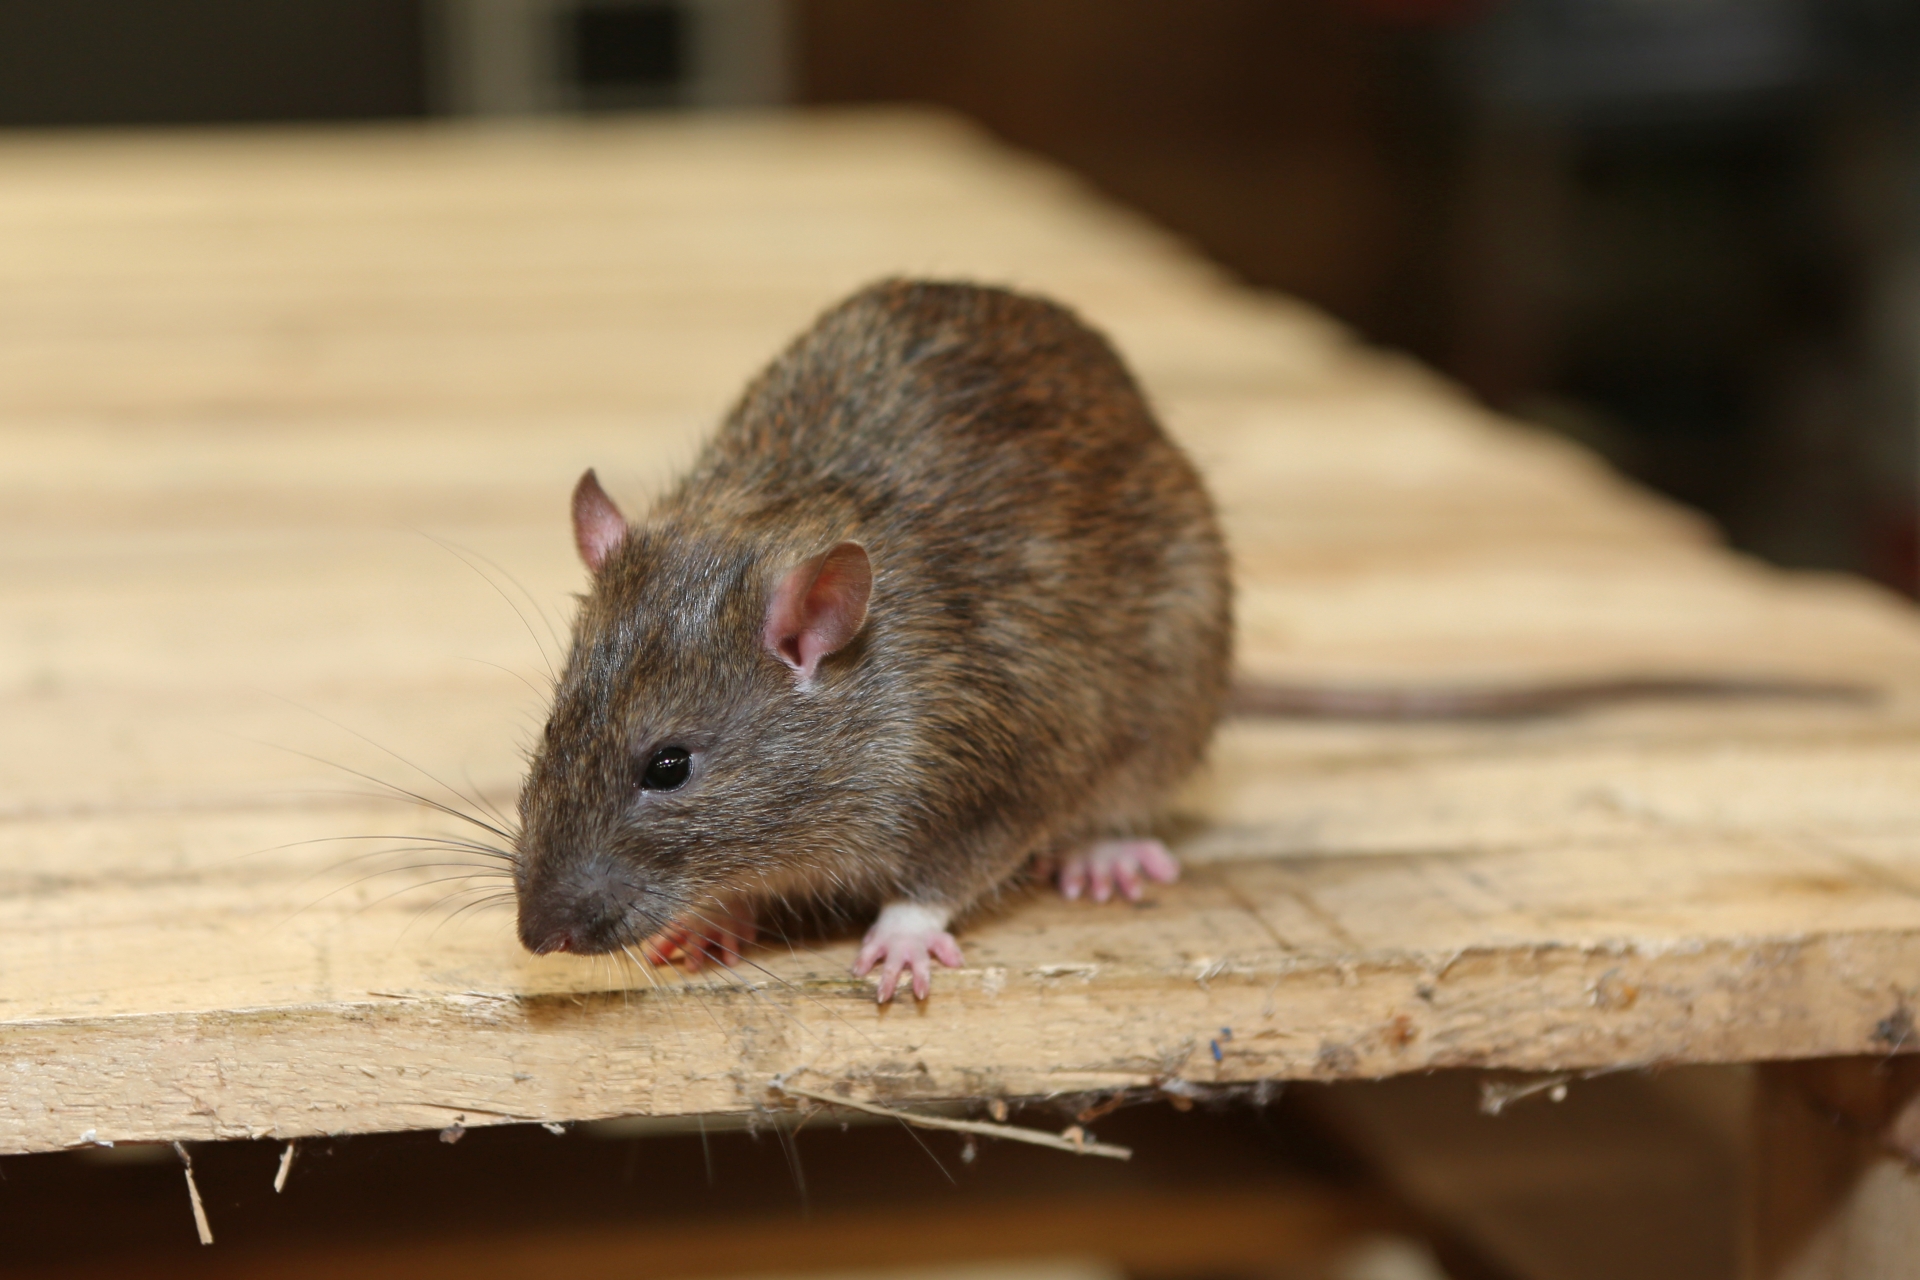 Rat extermination, Pest Control in Battersea, SW11 . Call Now 020 8166 9746